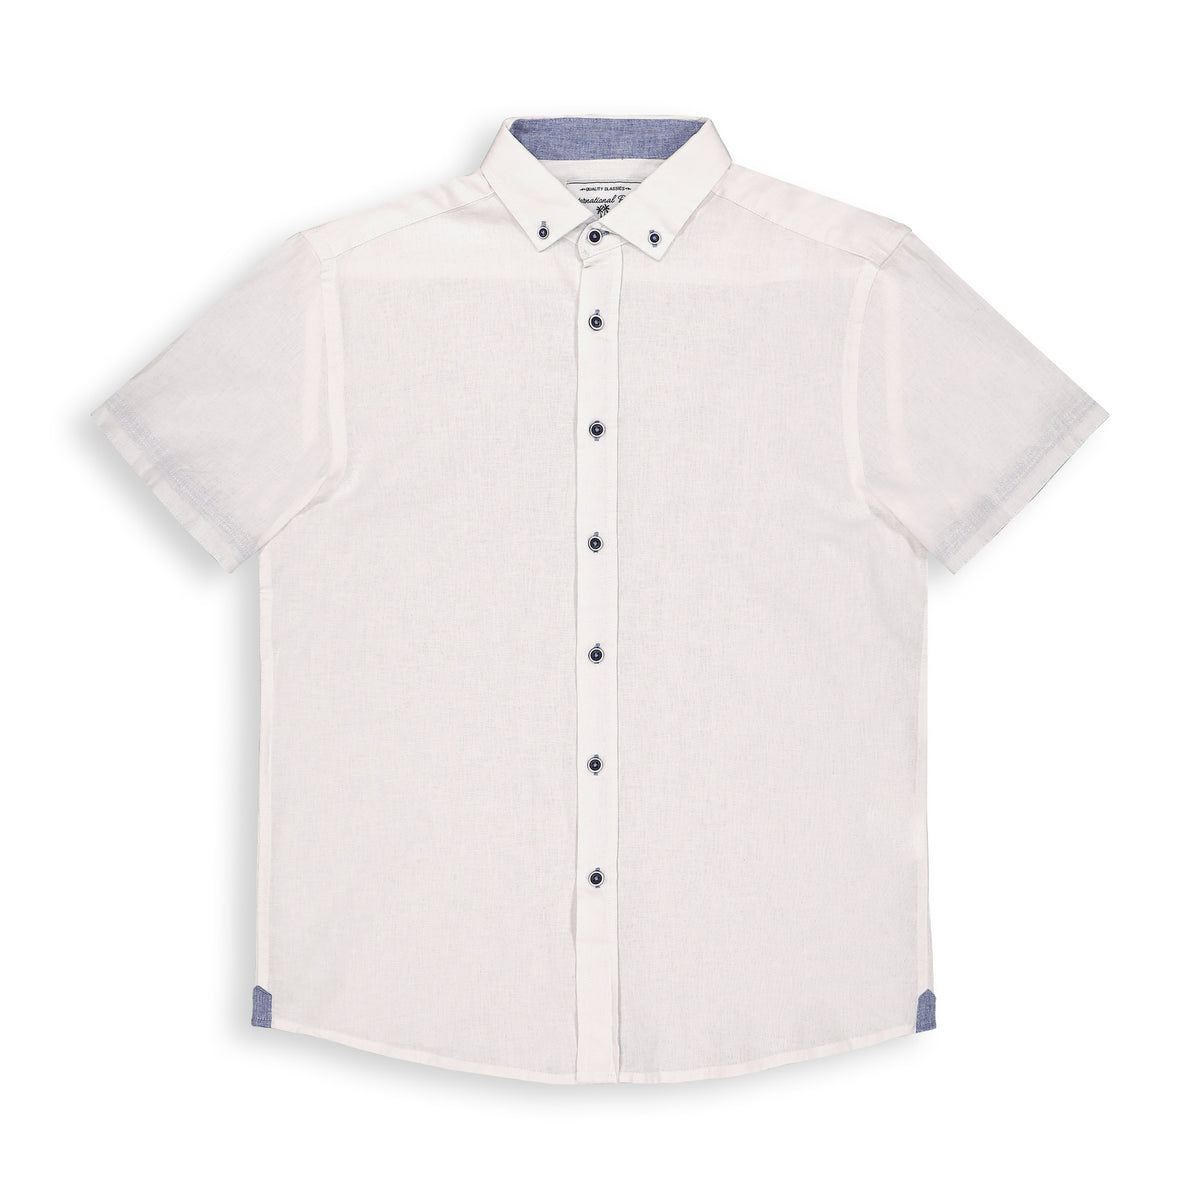 Front View of Short Sleeve Linen Blend Shirt in White